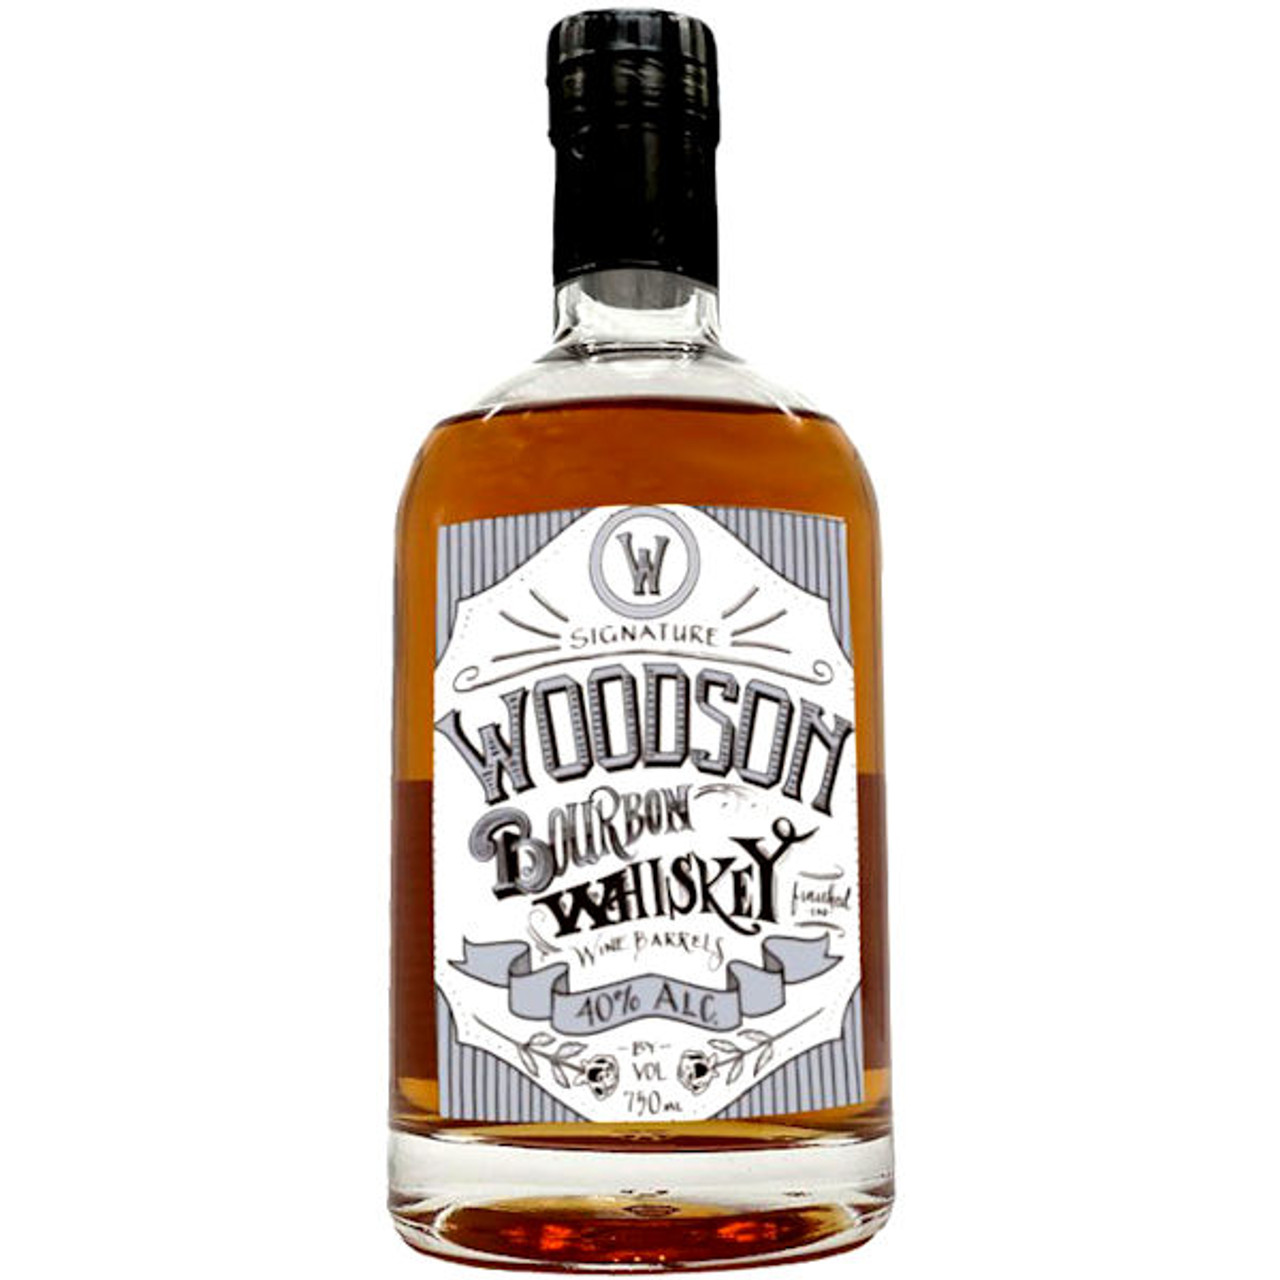 https://cdn11.bigcommerce.com/s-a04d0/images/stencil/1280x1280/products/21567/23438/woodson-white-and-silver-bourbon-whiskey__43874.1672075855.jpg?c=2